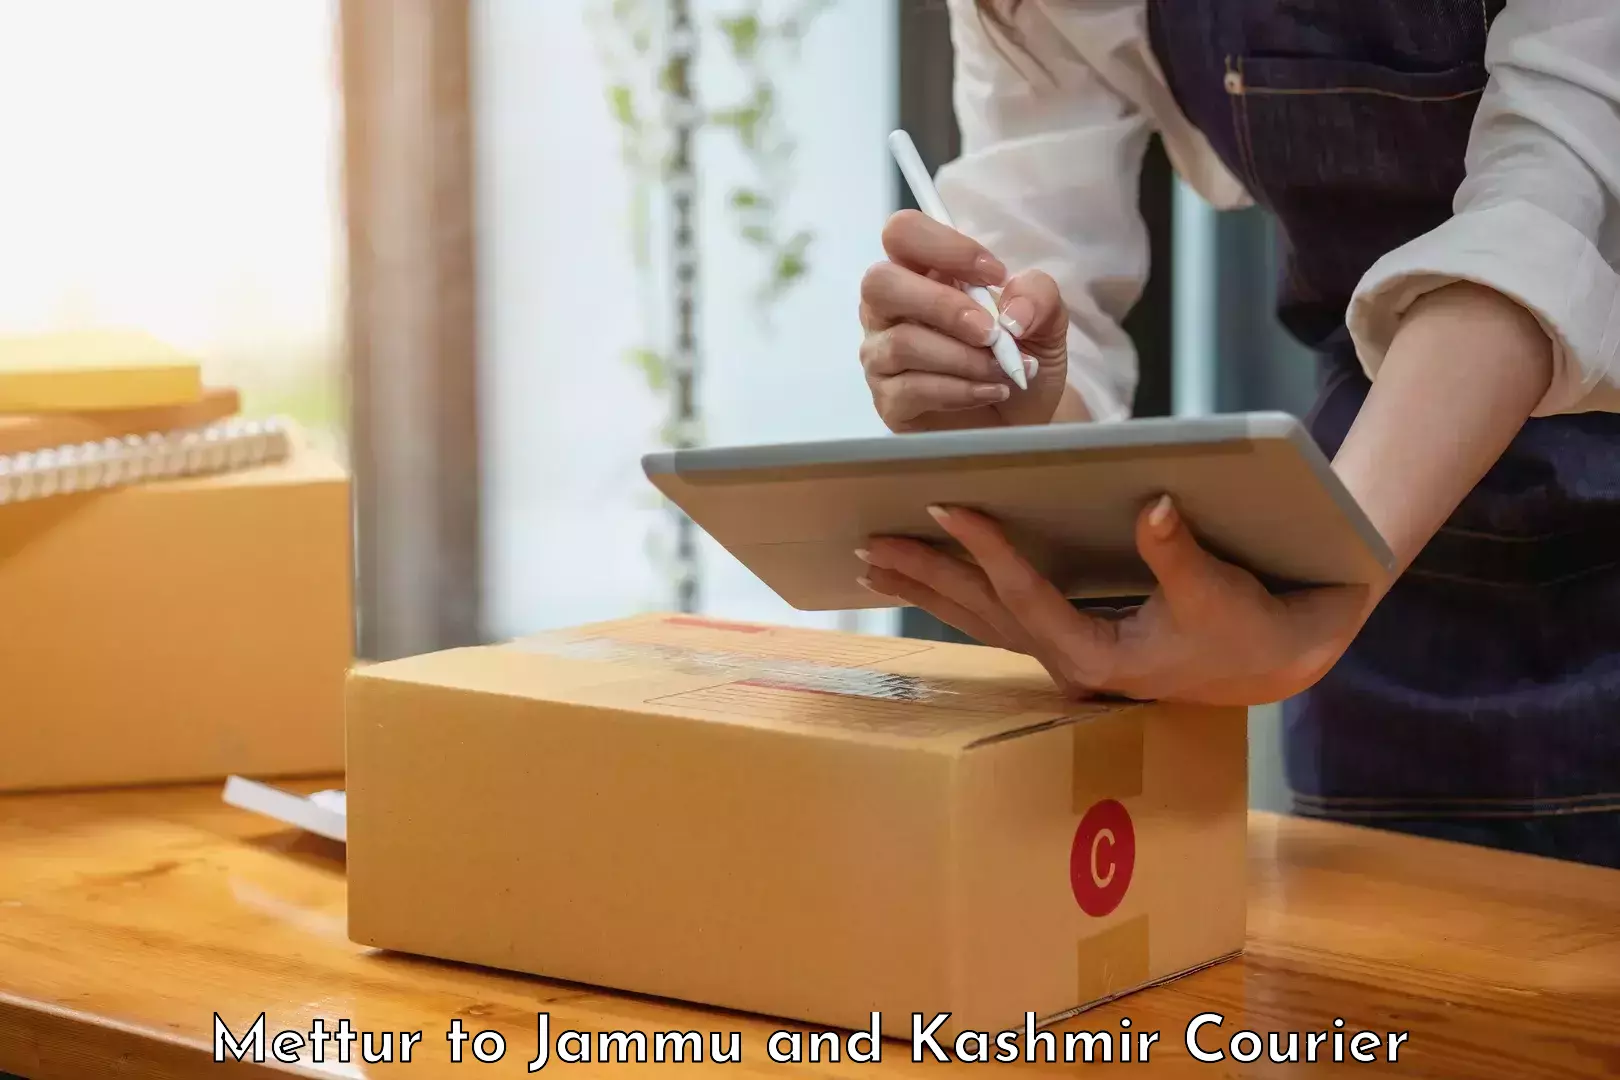 Cost-effective courier options Mettur to Jammu and Kashmir